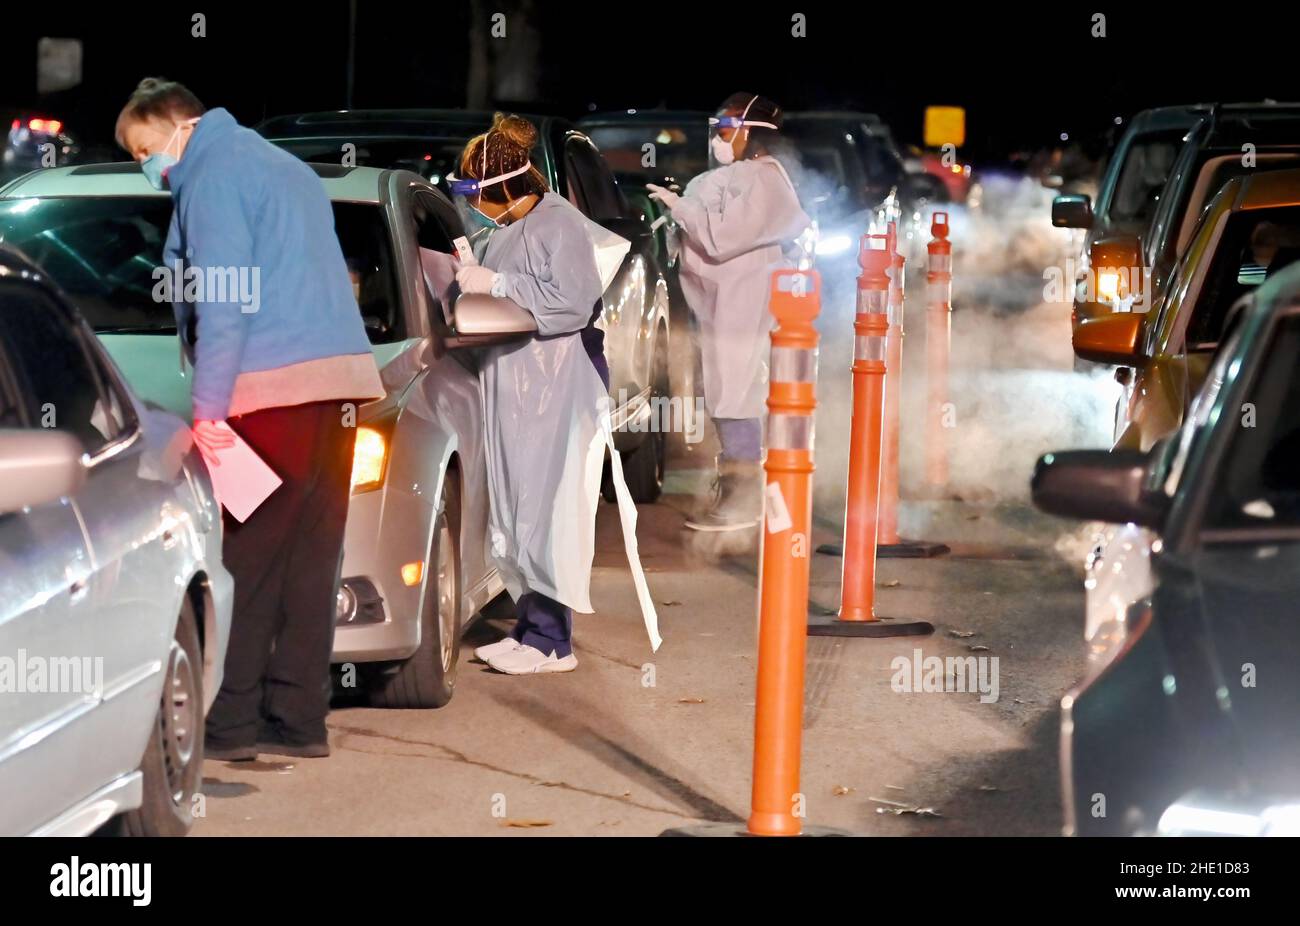 Wilkes-Barre, Pennsylvania, USA. 6th Jan, 2022. A Health worker registers as others take swab samples from people at the drive thru Covid-19 testing site.With the new Omicron variant Covid-19 surge, testing sites are seeing long lines for testing. Employees from AMI Expeditionary Healthcare are seen in Pennsylvania giving Covid-19 tests. The group has been moving from hotel to hotel and working 12 hour days, 4-5 days a week to test community members for Covid-19. (Credit Image: © Aimee Dilger/SOPA Images via ZUMA Press Wire) Stock Photo